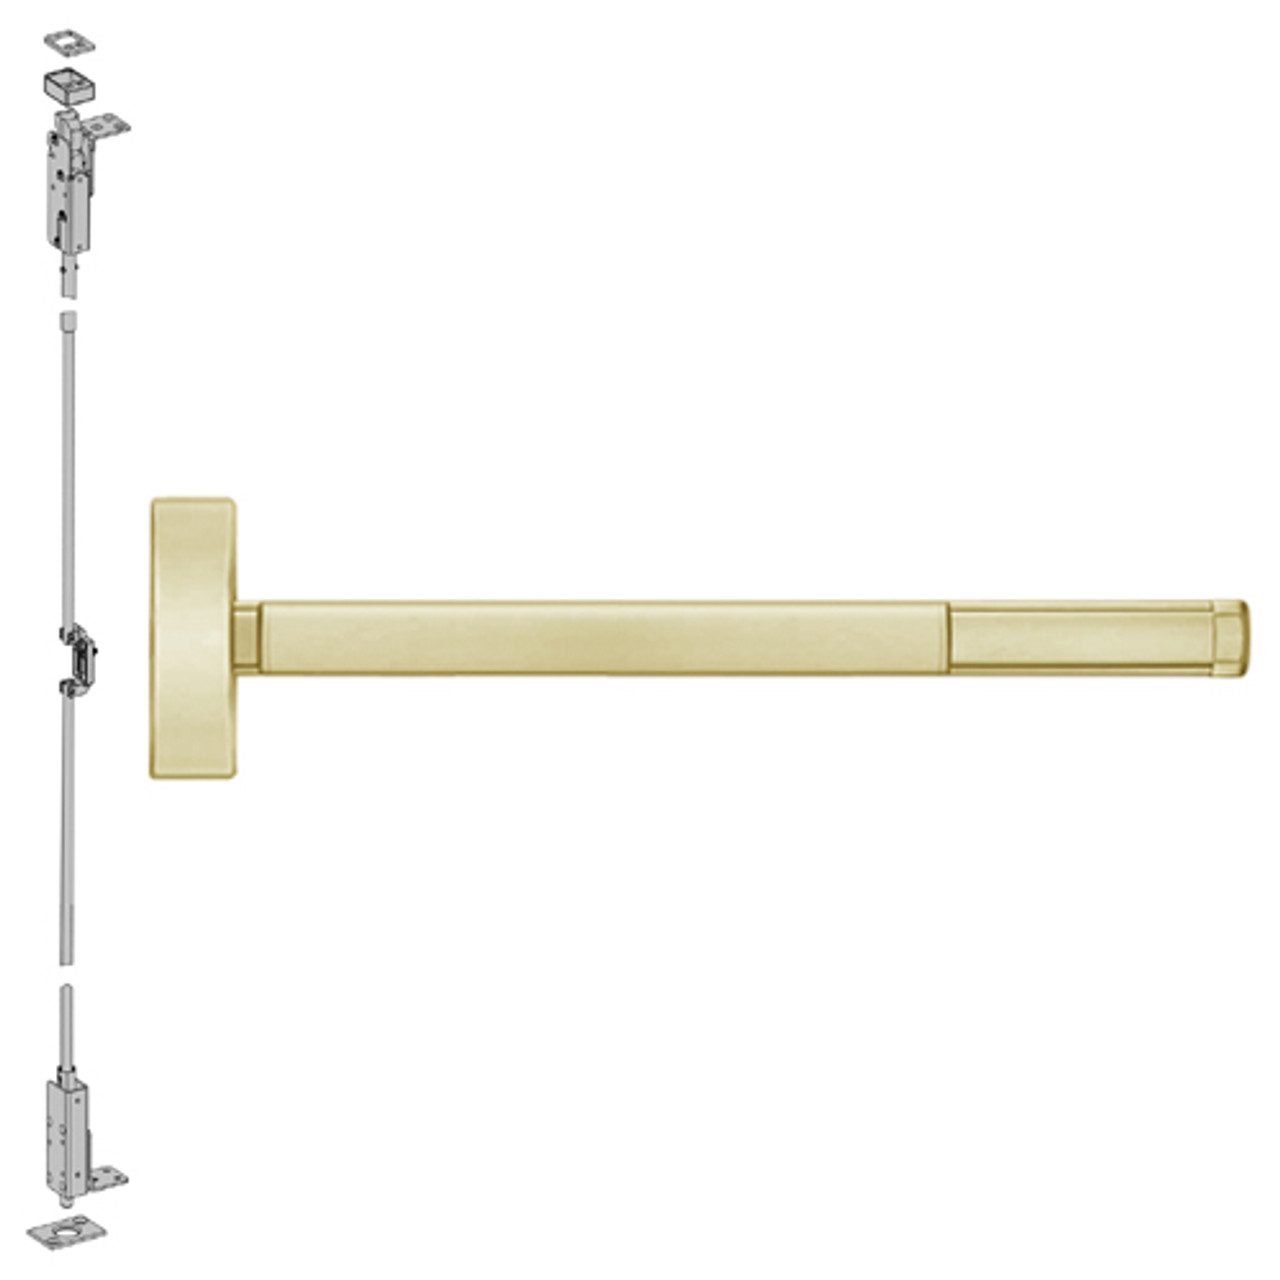 TSFL2701-606-36 PHI 2700 Series Wood Door Concealed Vertical Exit Device with Touchbar Monitoring Switch Prepped for Cover Plate in Satin Brass Finish